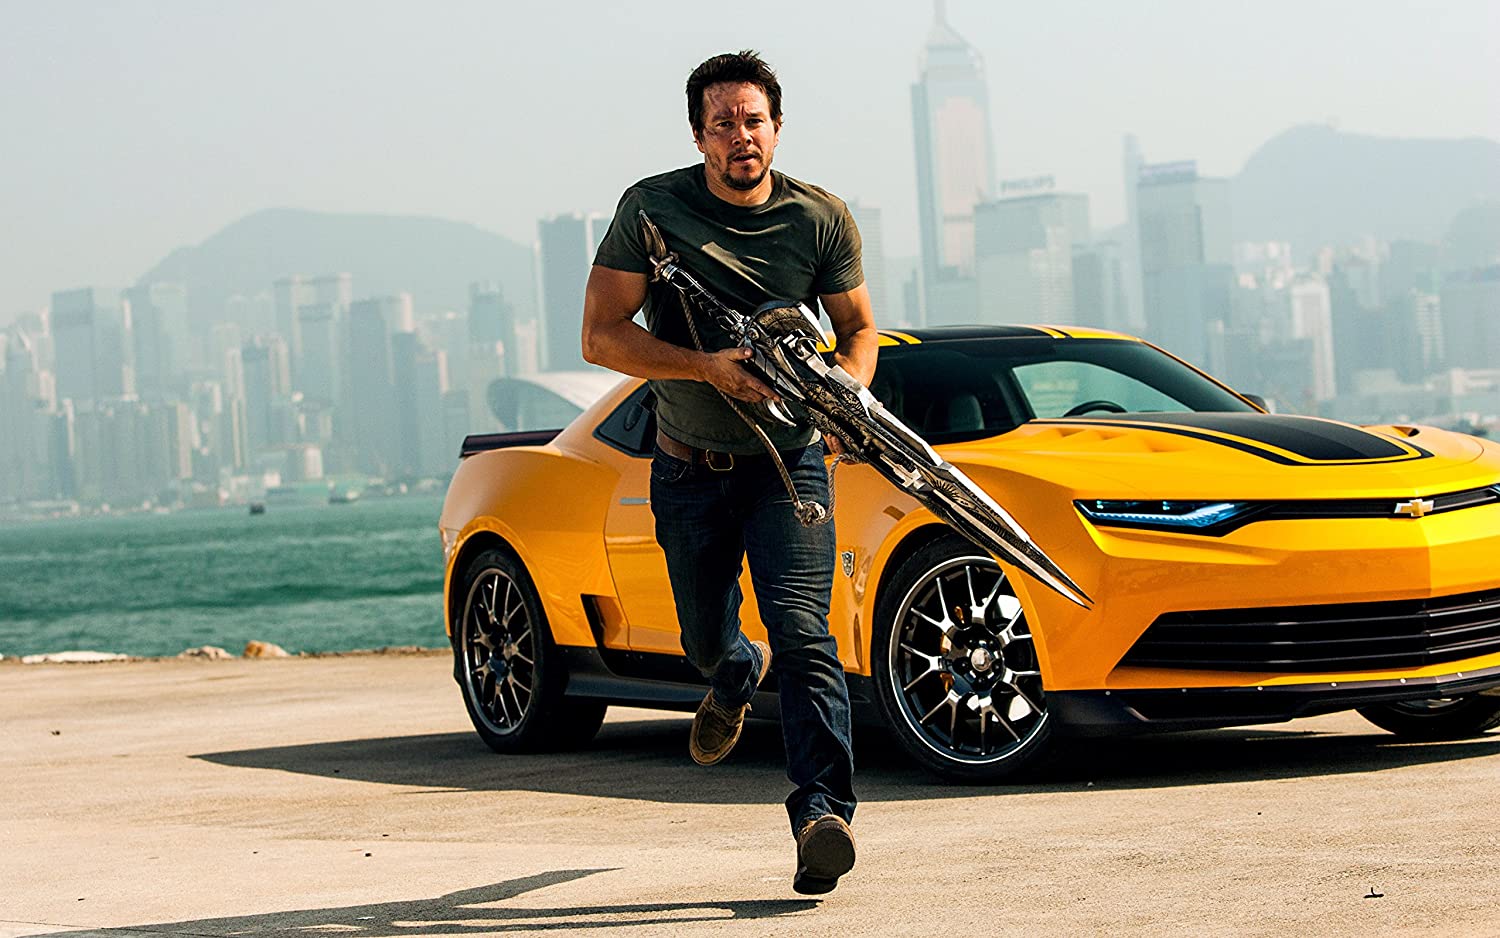 Mark Wahlberg in the movie Transformers: Age of Extinction.